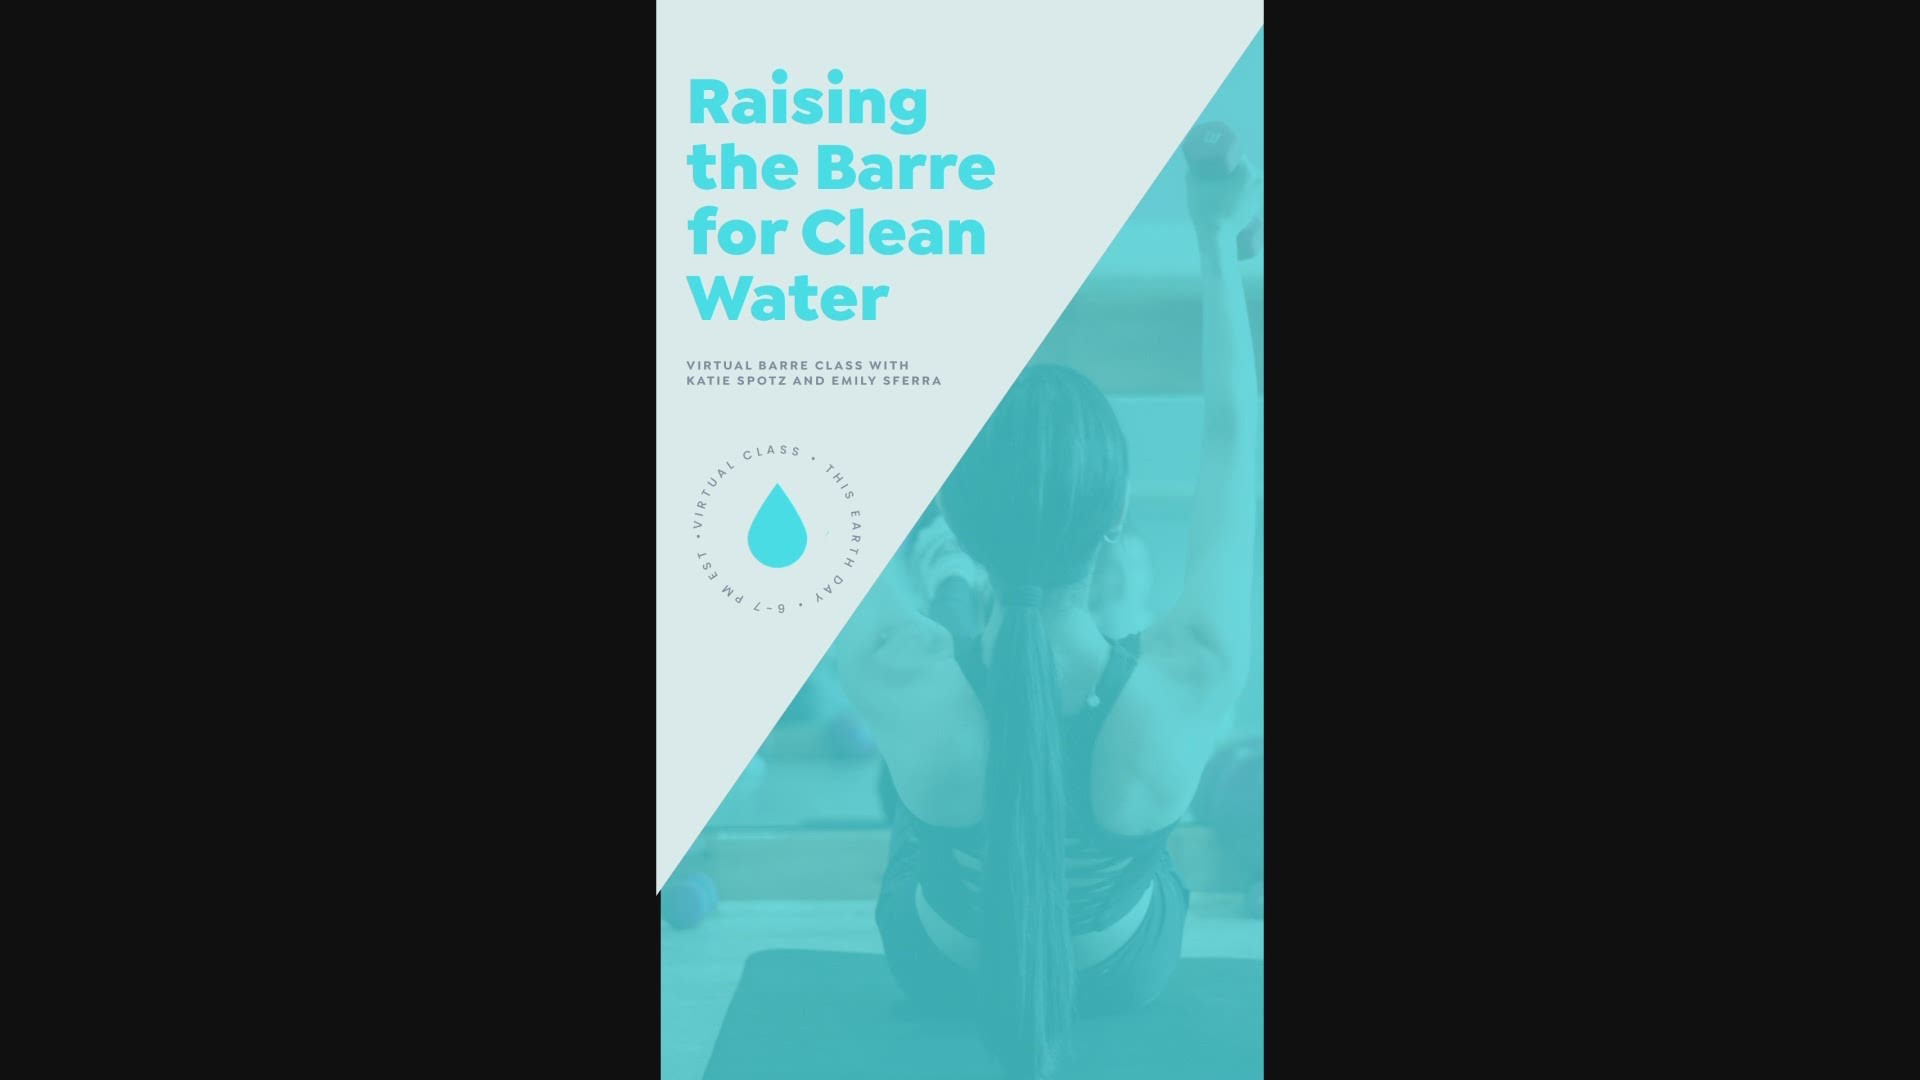 Katie Spotz is hosting a virtual workout and raising money to bring clean water to those in need.